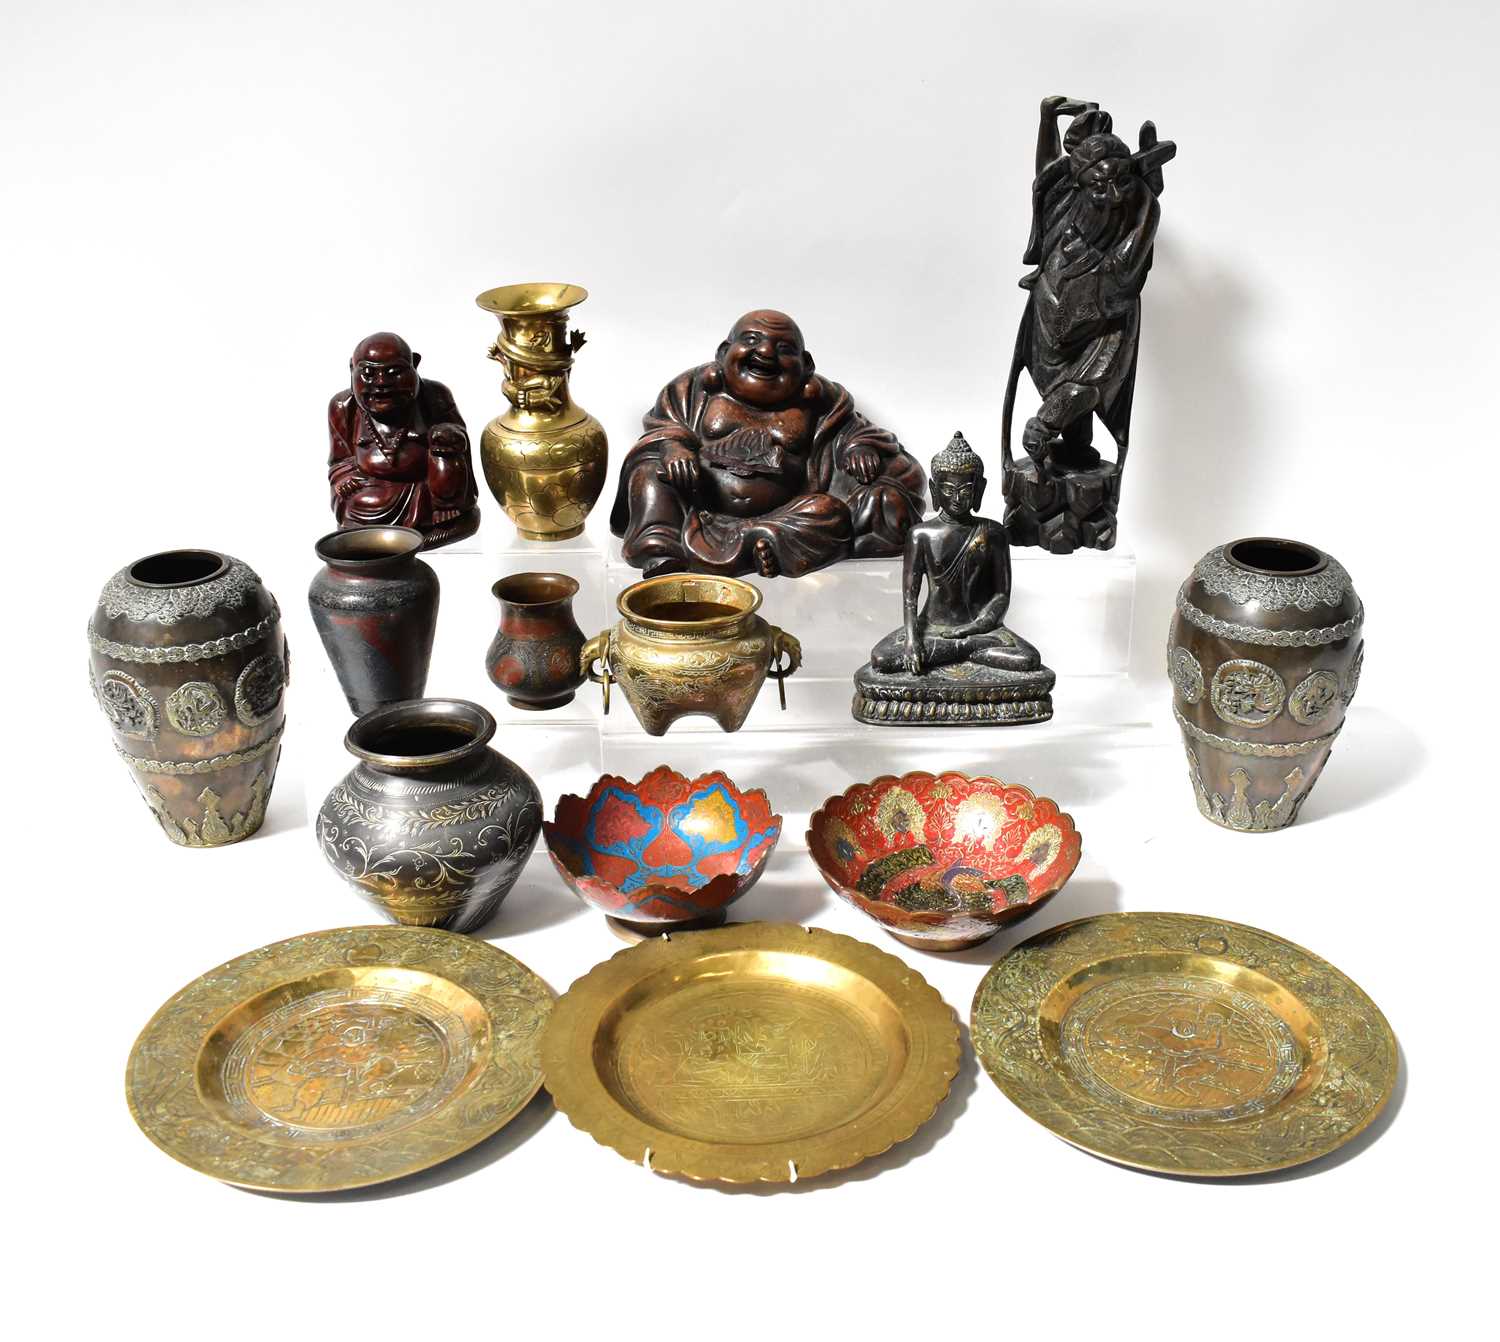 A quantity of decorative Oriental metalware, including a koro, a pair of vases, seated figure, etc.